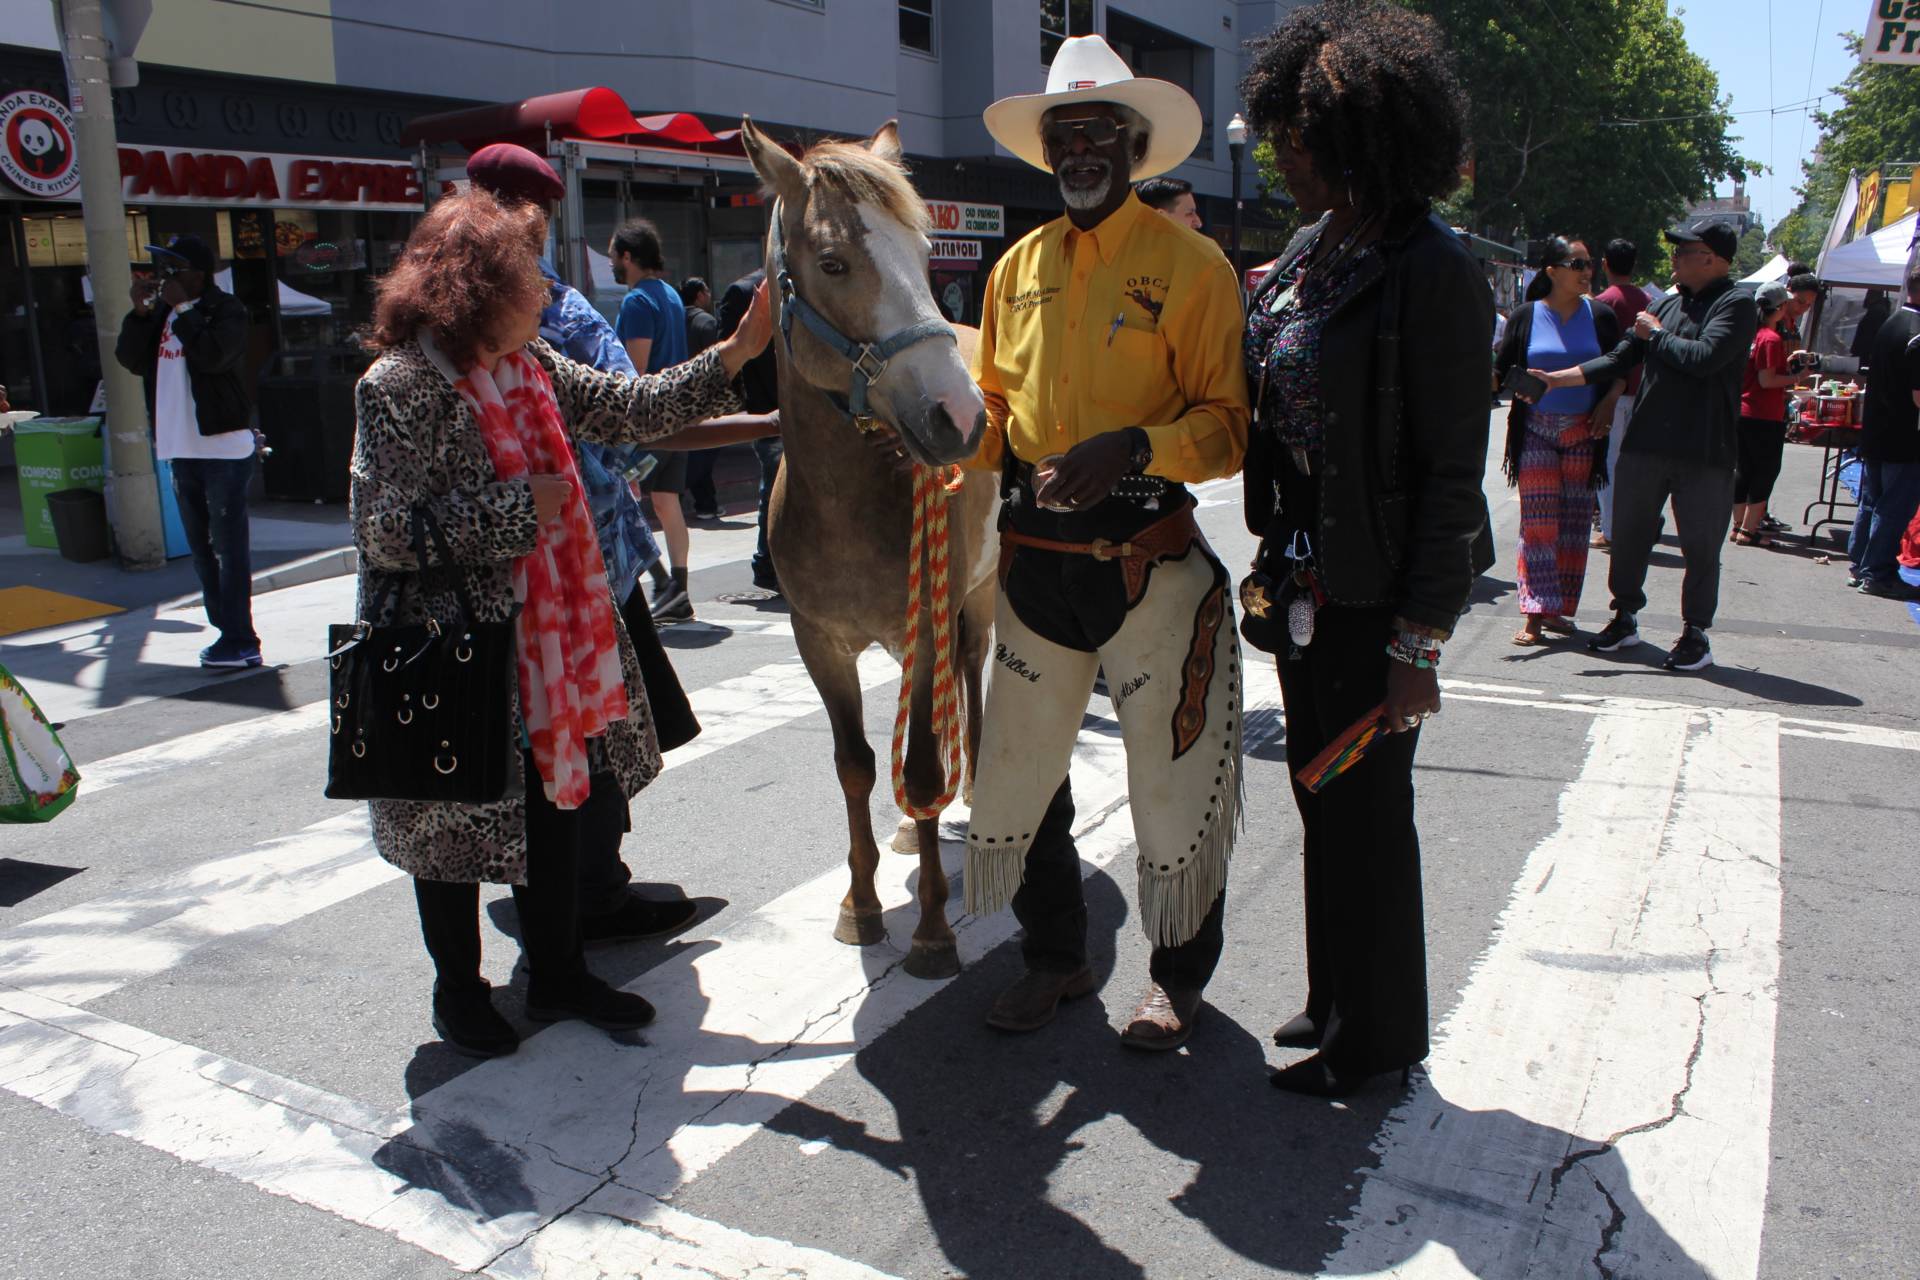 Wilbert McAllister President of Oakland Black Cowboys Association introduces pony, Martin Luther, to San Francisco Juneteenth-attendee Irina Dalian alongside Yolanda Williams of the San Francisco Police Officer's Association. McAllister says Martin Luther is here to honor "fallen cowgirl" Rachel Townsend, longtime event organizer who passed away earlier this year.